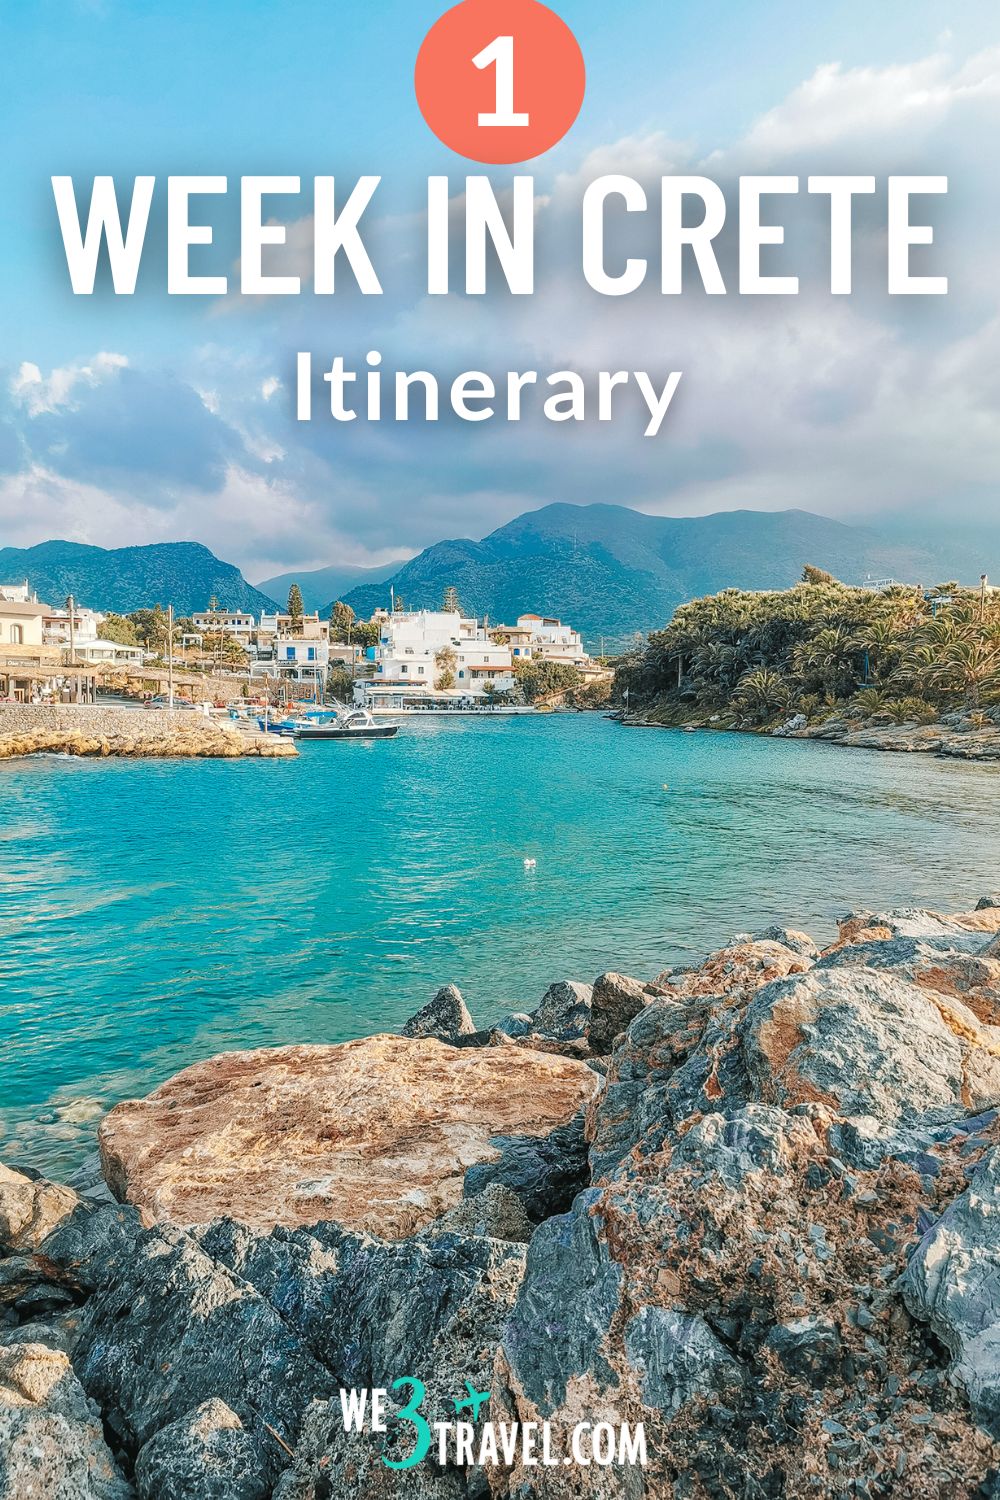 1 week in Crete itinerary and all you need to plan a Greece vacation to Crete including Chania and Heraklion.